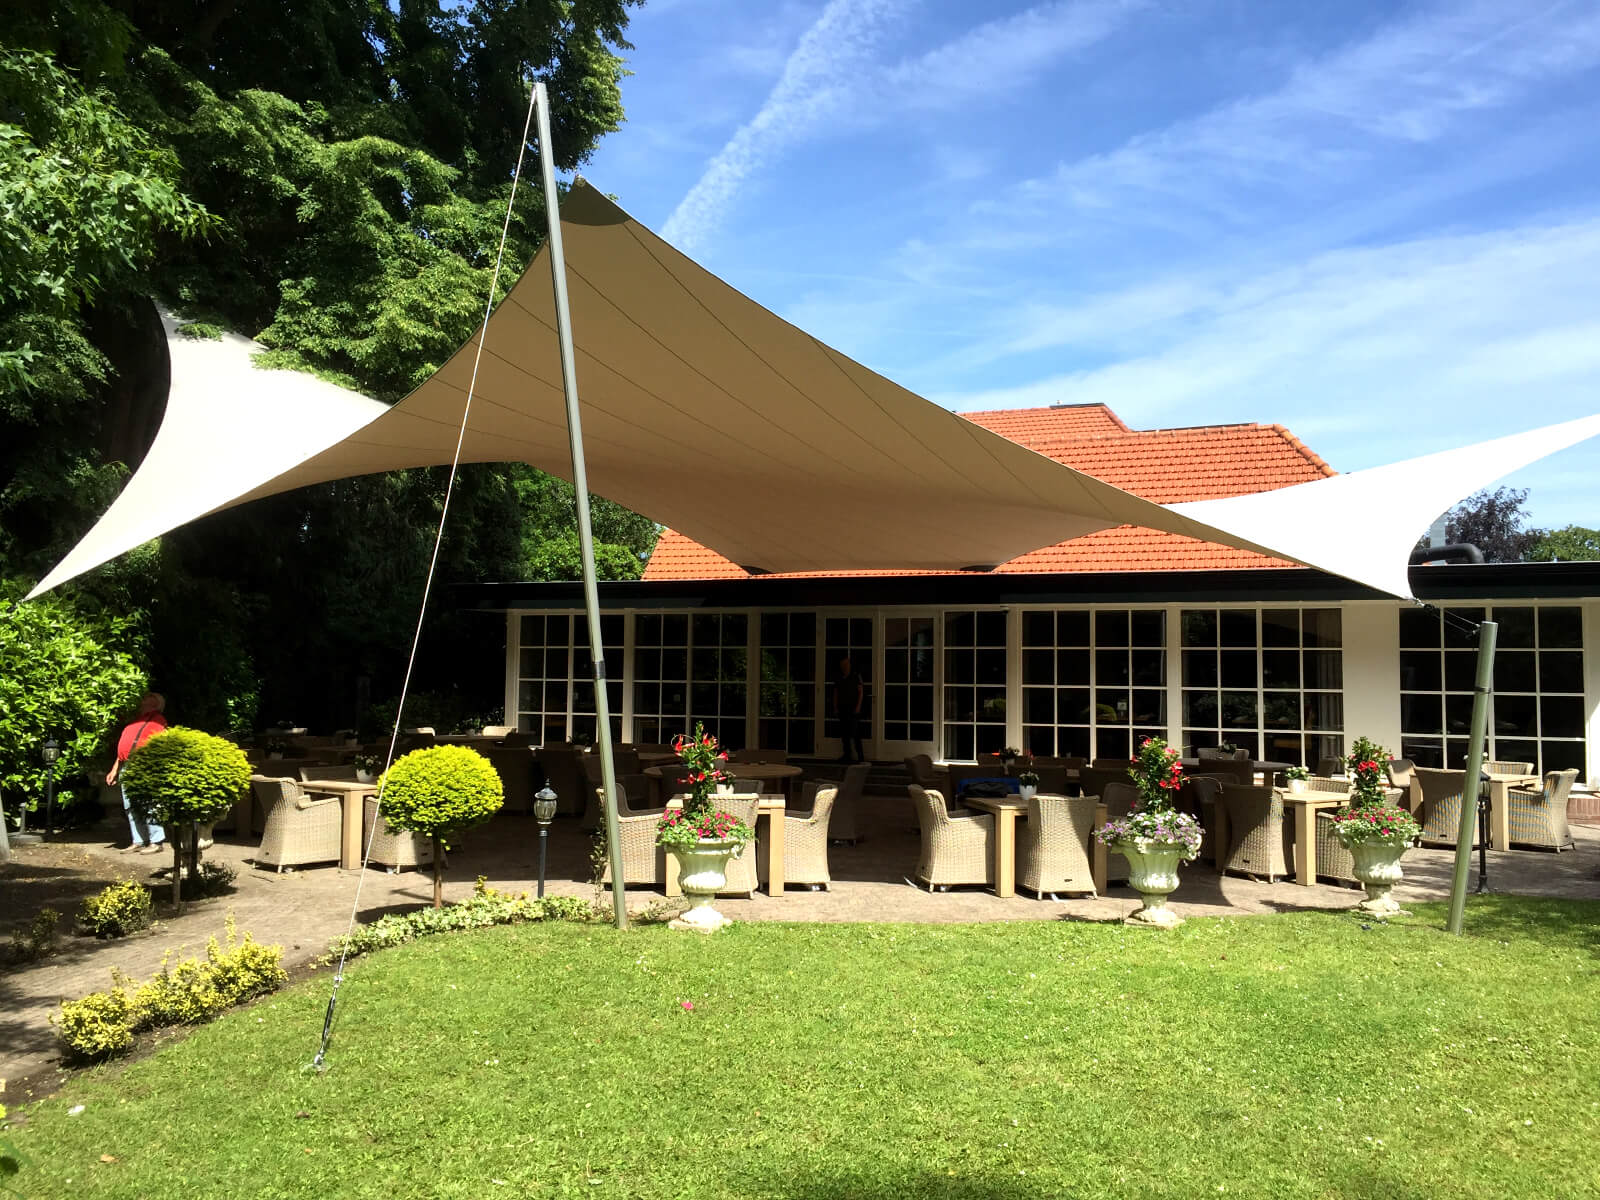 A stand-alone Texstyleroof is not just a shade sail but an actual roof